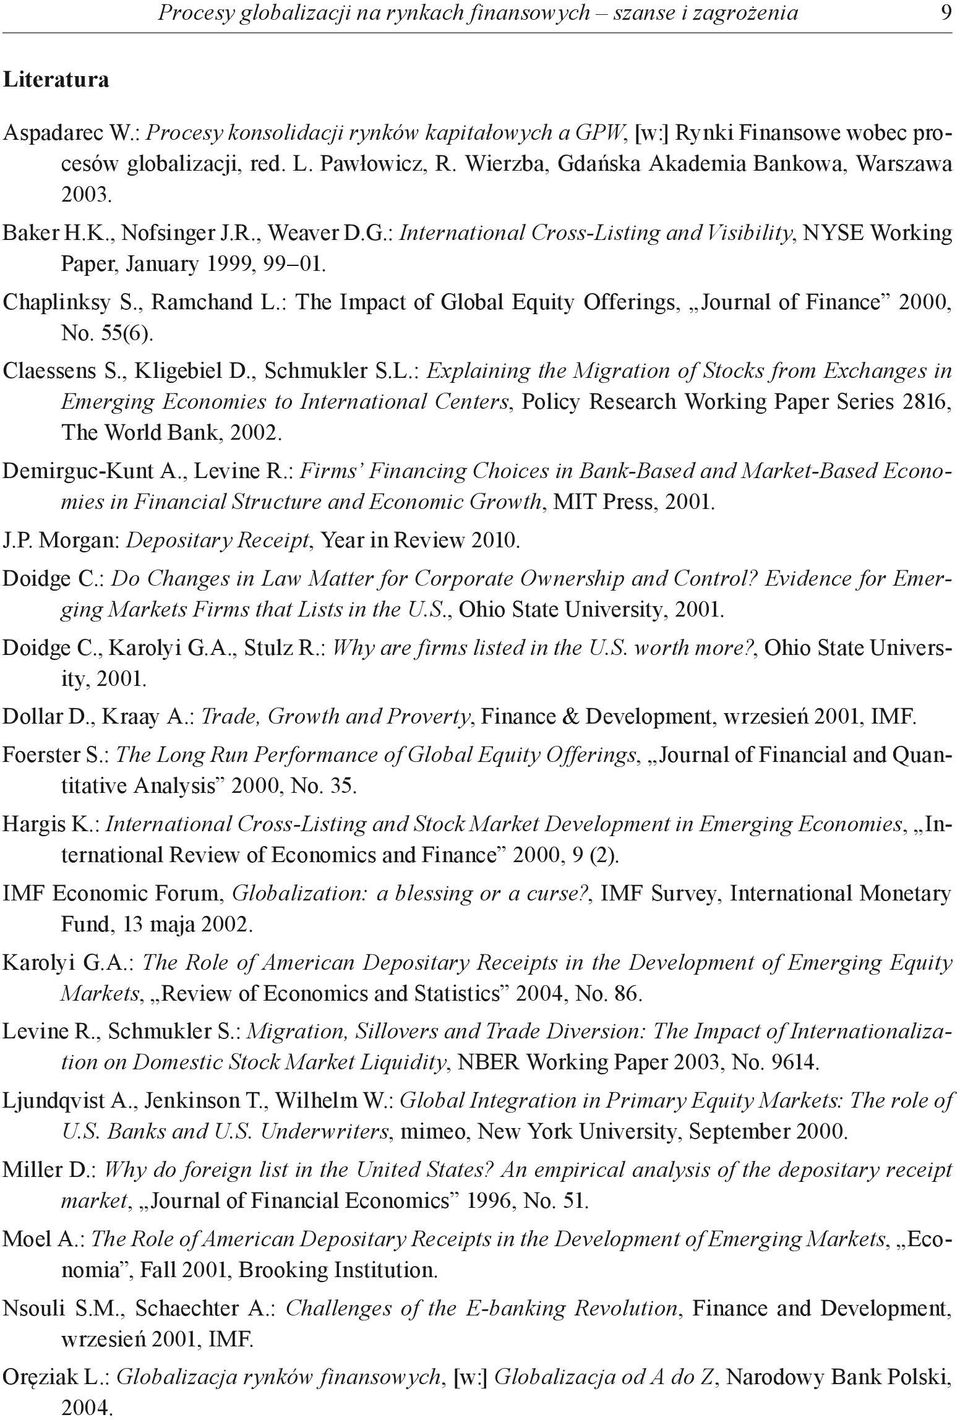 , Ramchand L.: The Impact of Global Equity Offerings, Journal of Finance 2000, No. 55(6). Claessens S., Kligebiel D., Schmukler S.L.: Explaining the Migration of Stocks from Exchanges in Emerging Economies to International Centers, Policy Research Working Paper Series 2816, The World Bank, 2002.